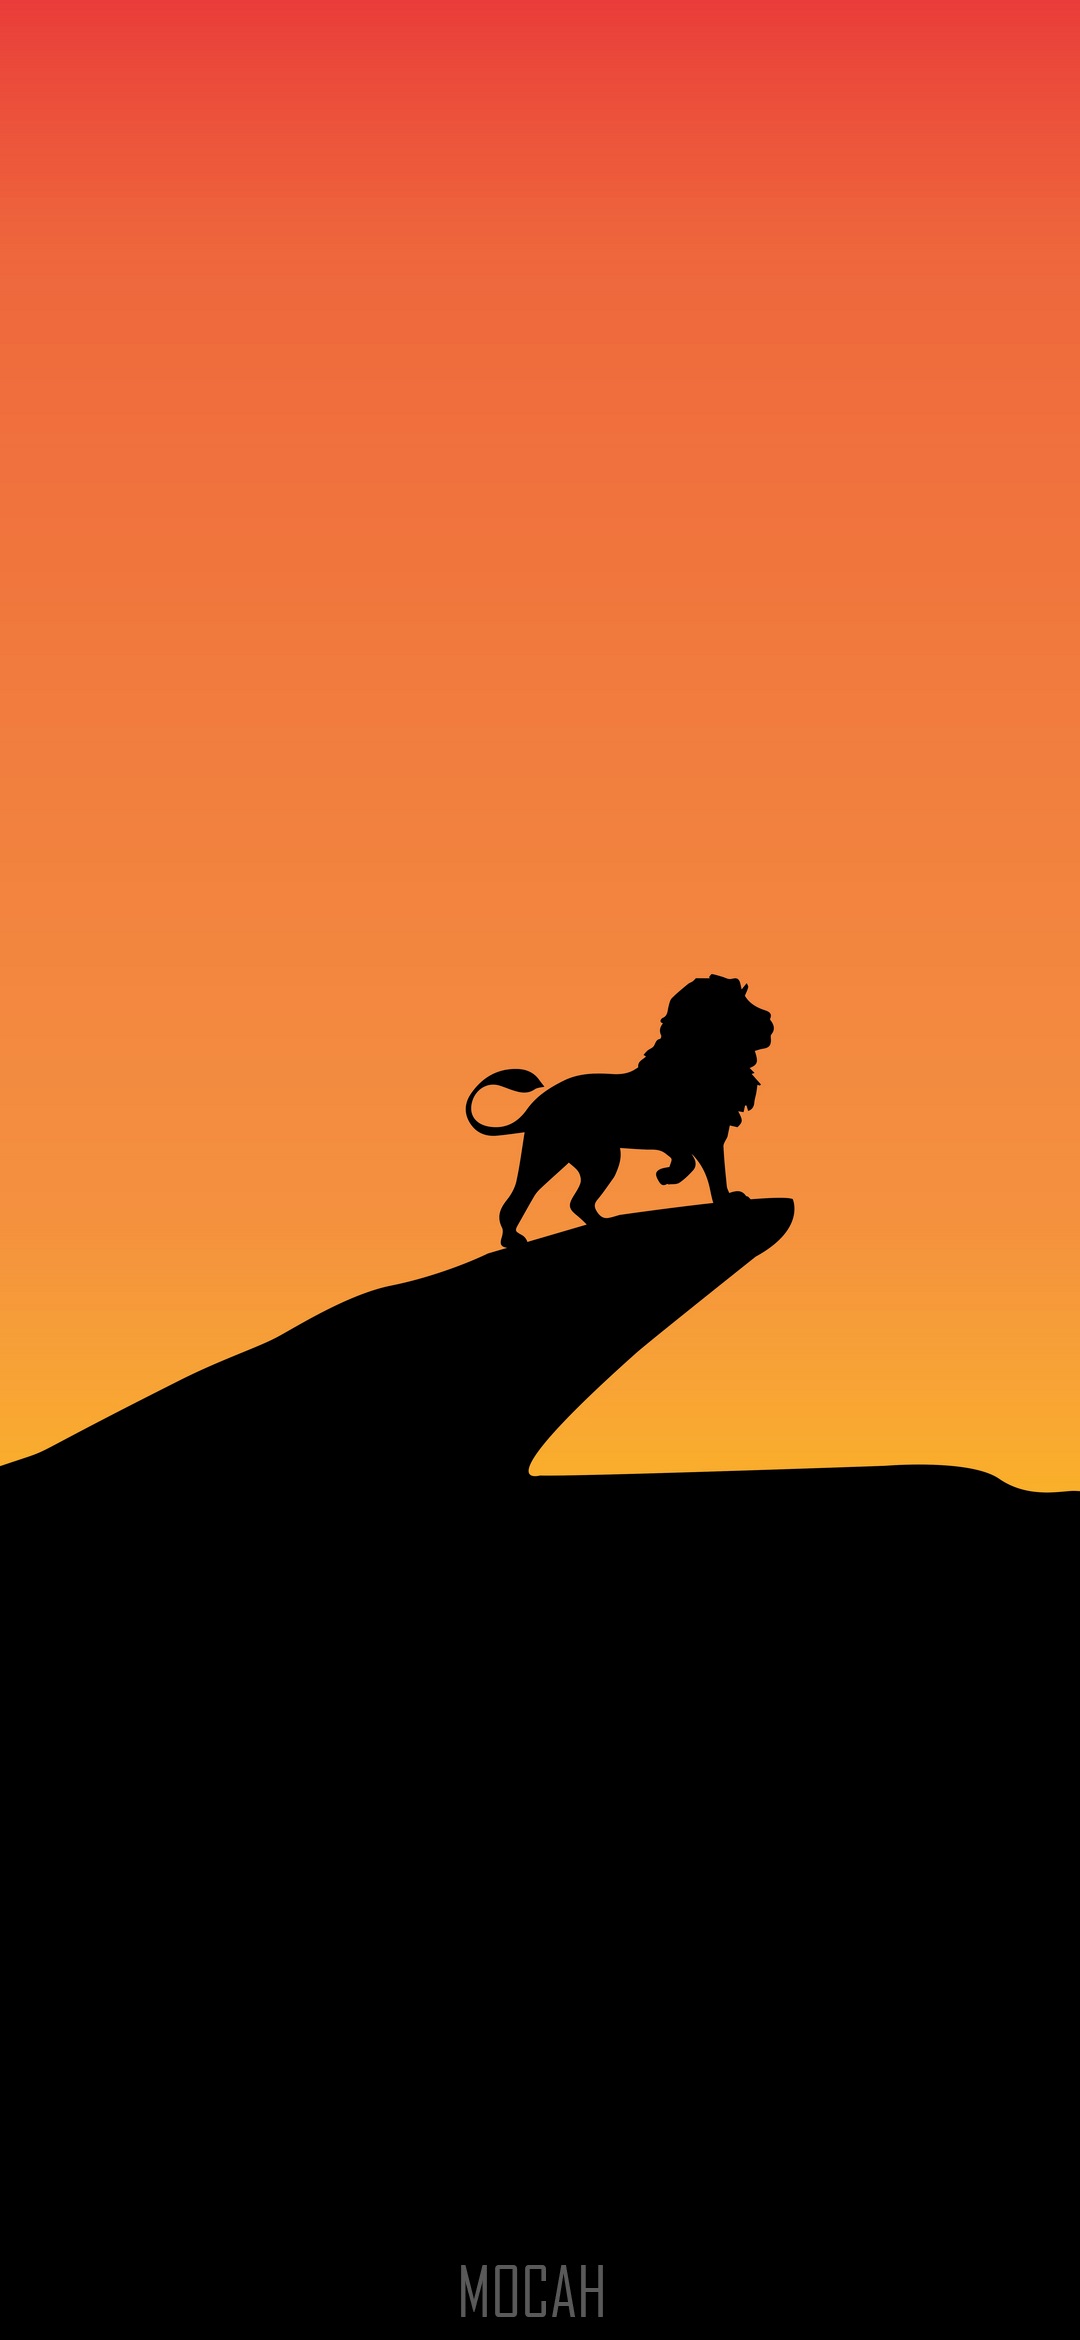 A lion standing on top of the hill - The Lion King, lion